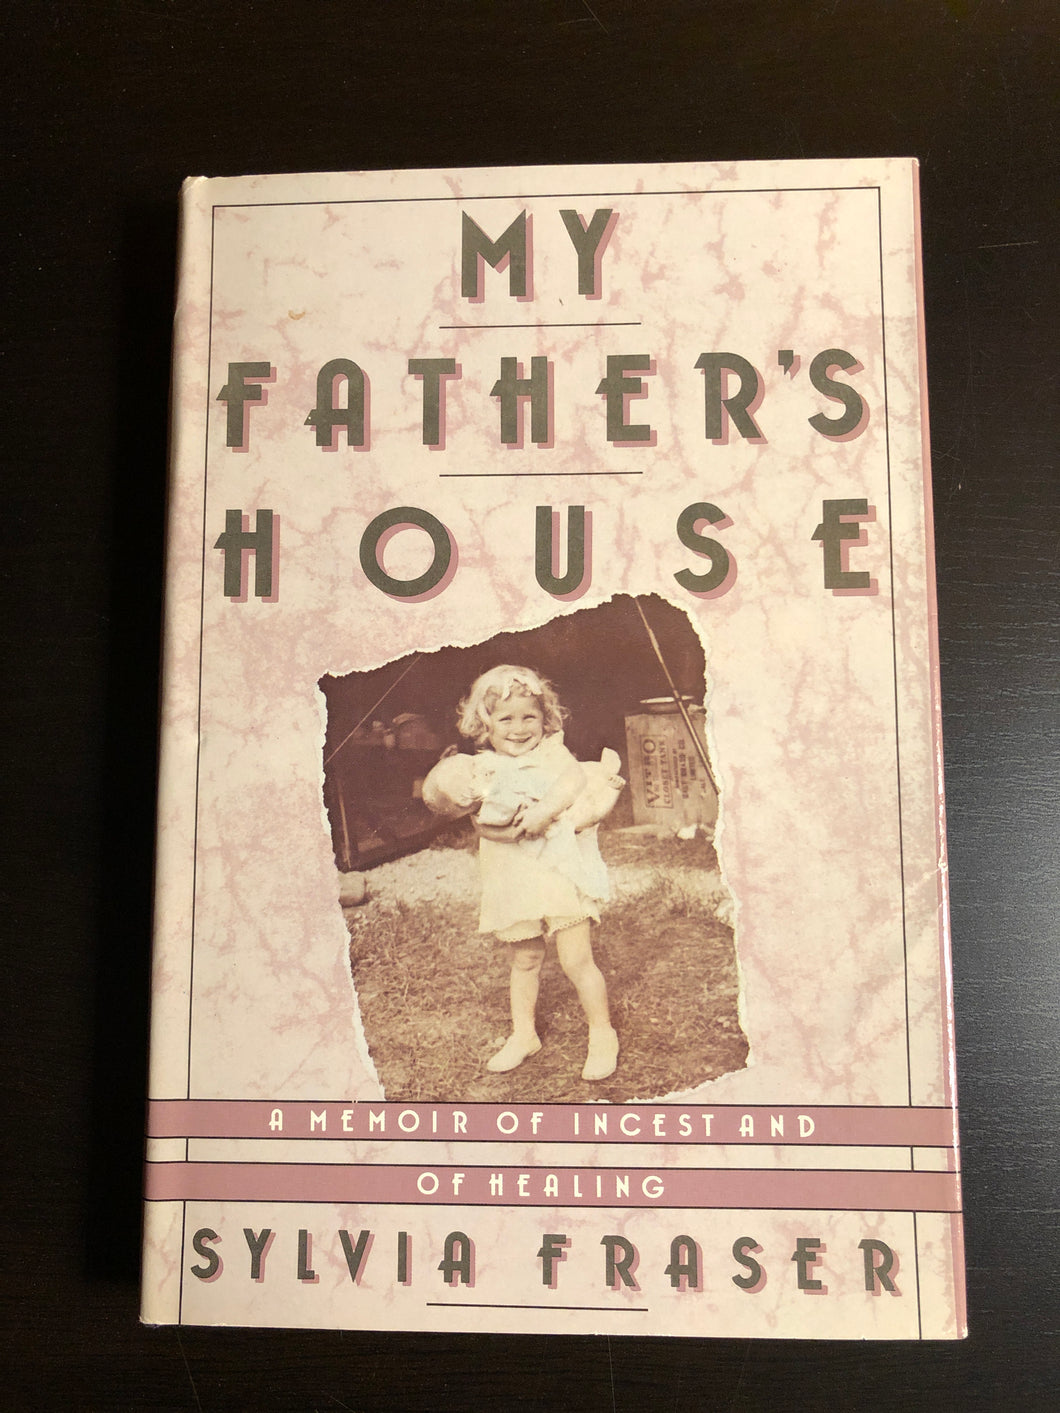 My Father's House: A Memoir of Incest and of Healing